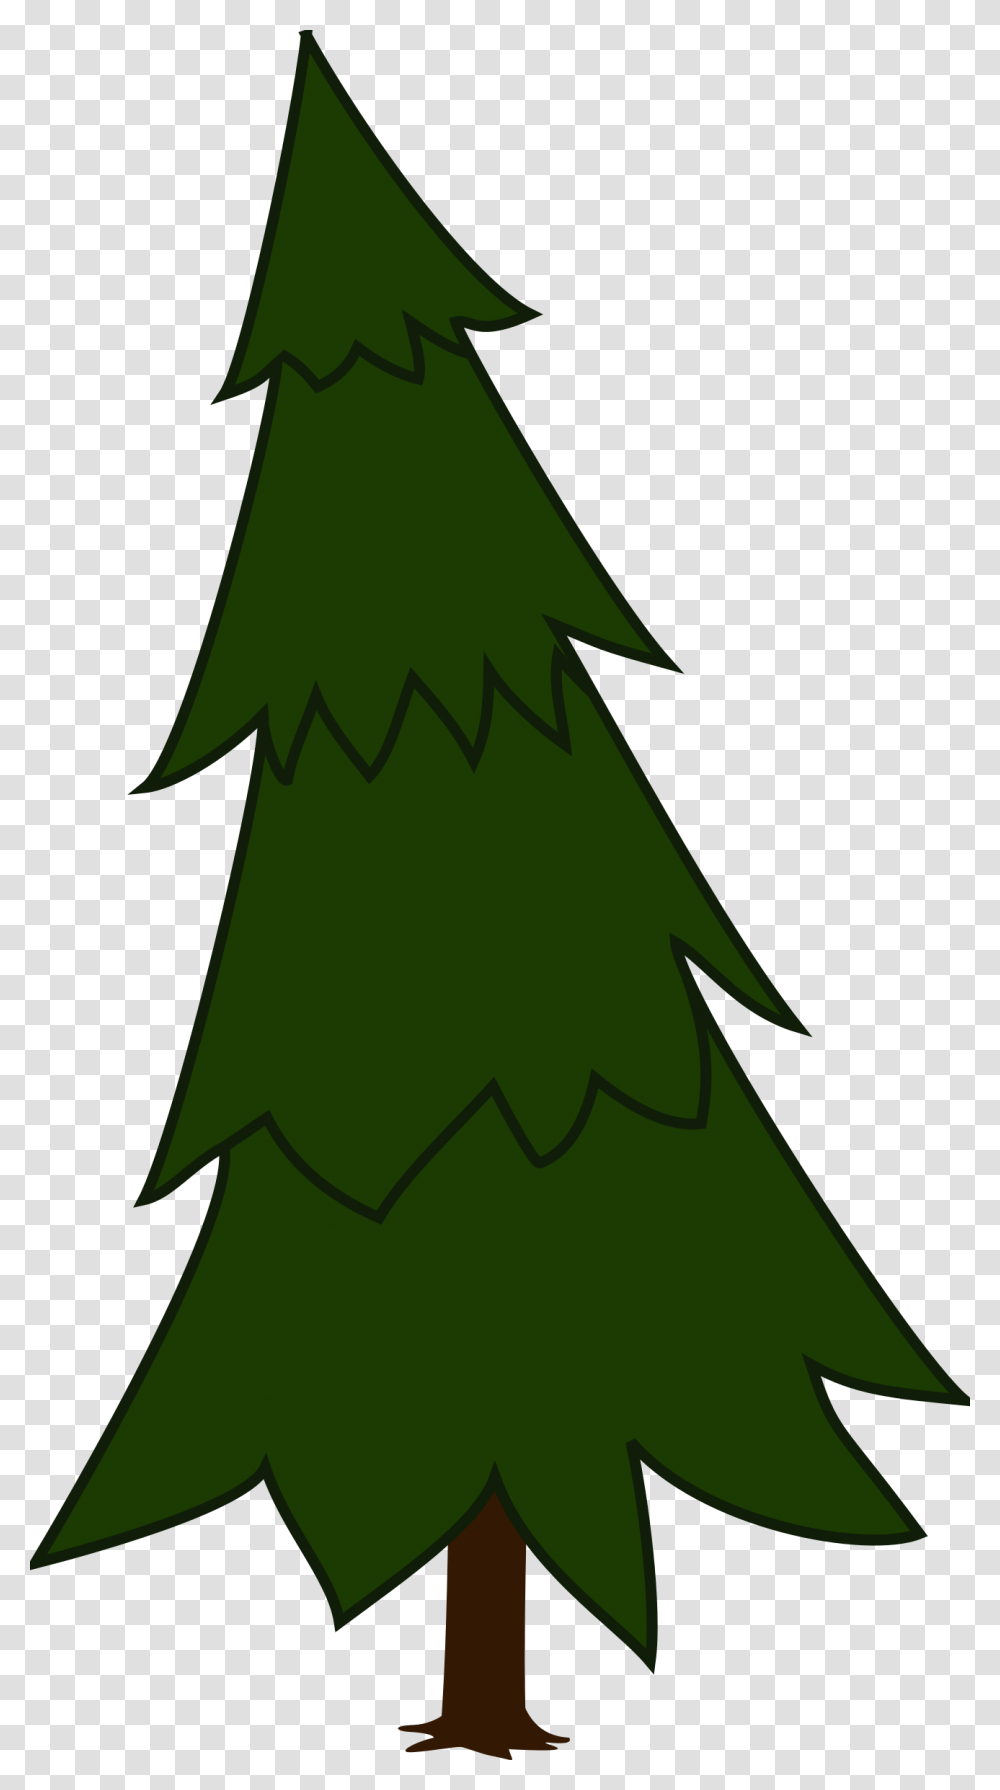 Spruce Tree Silhouette Pine Tree Animated, Plant, Ornament, Pattern, Fractal Transparent Png